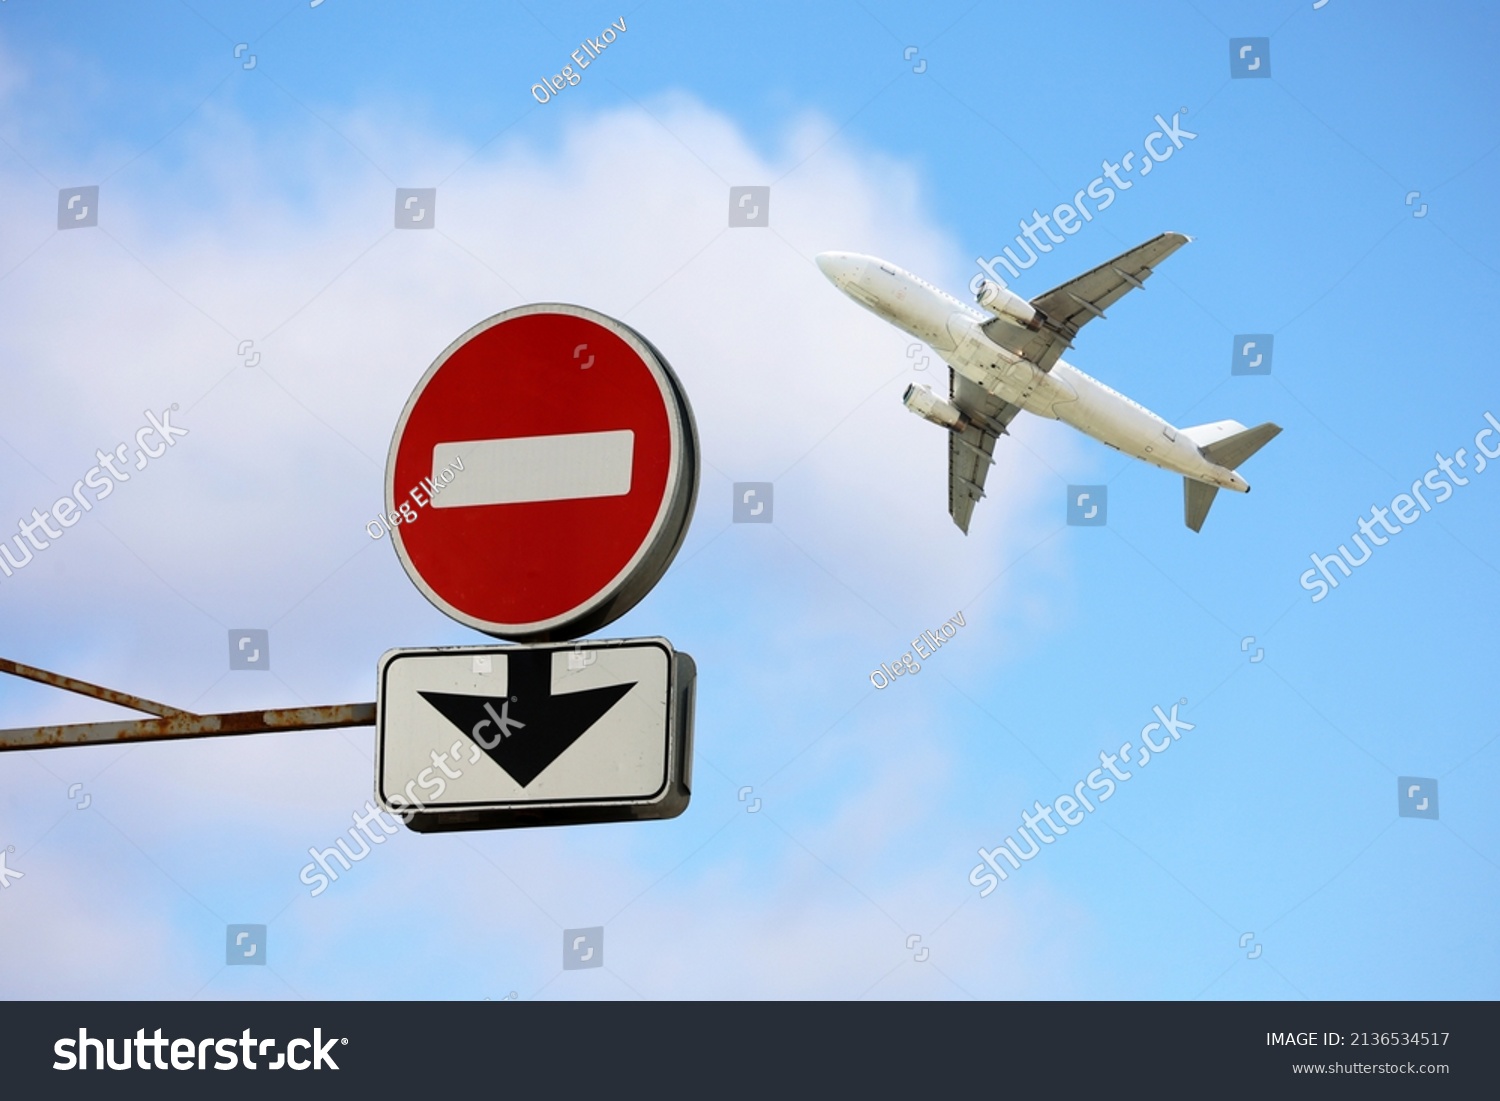 Stop sign with down arrow and airplane in blue sky. Concept of band on flights over Europe from Russia, sanctions due to the russian special military operation in Ukraine #2136534517